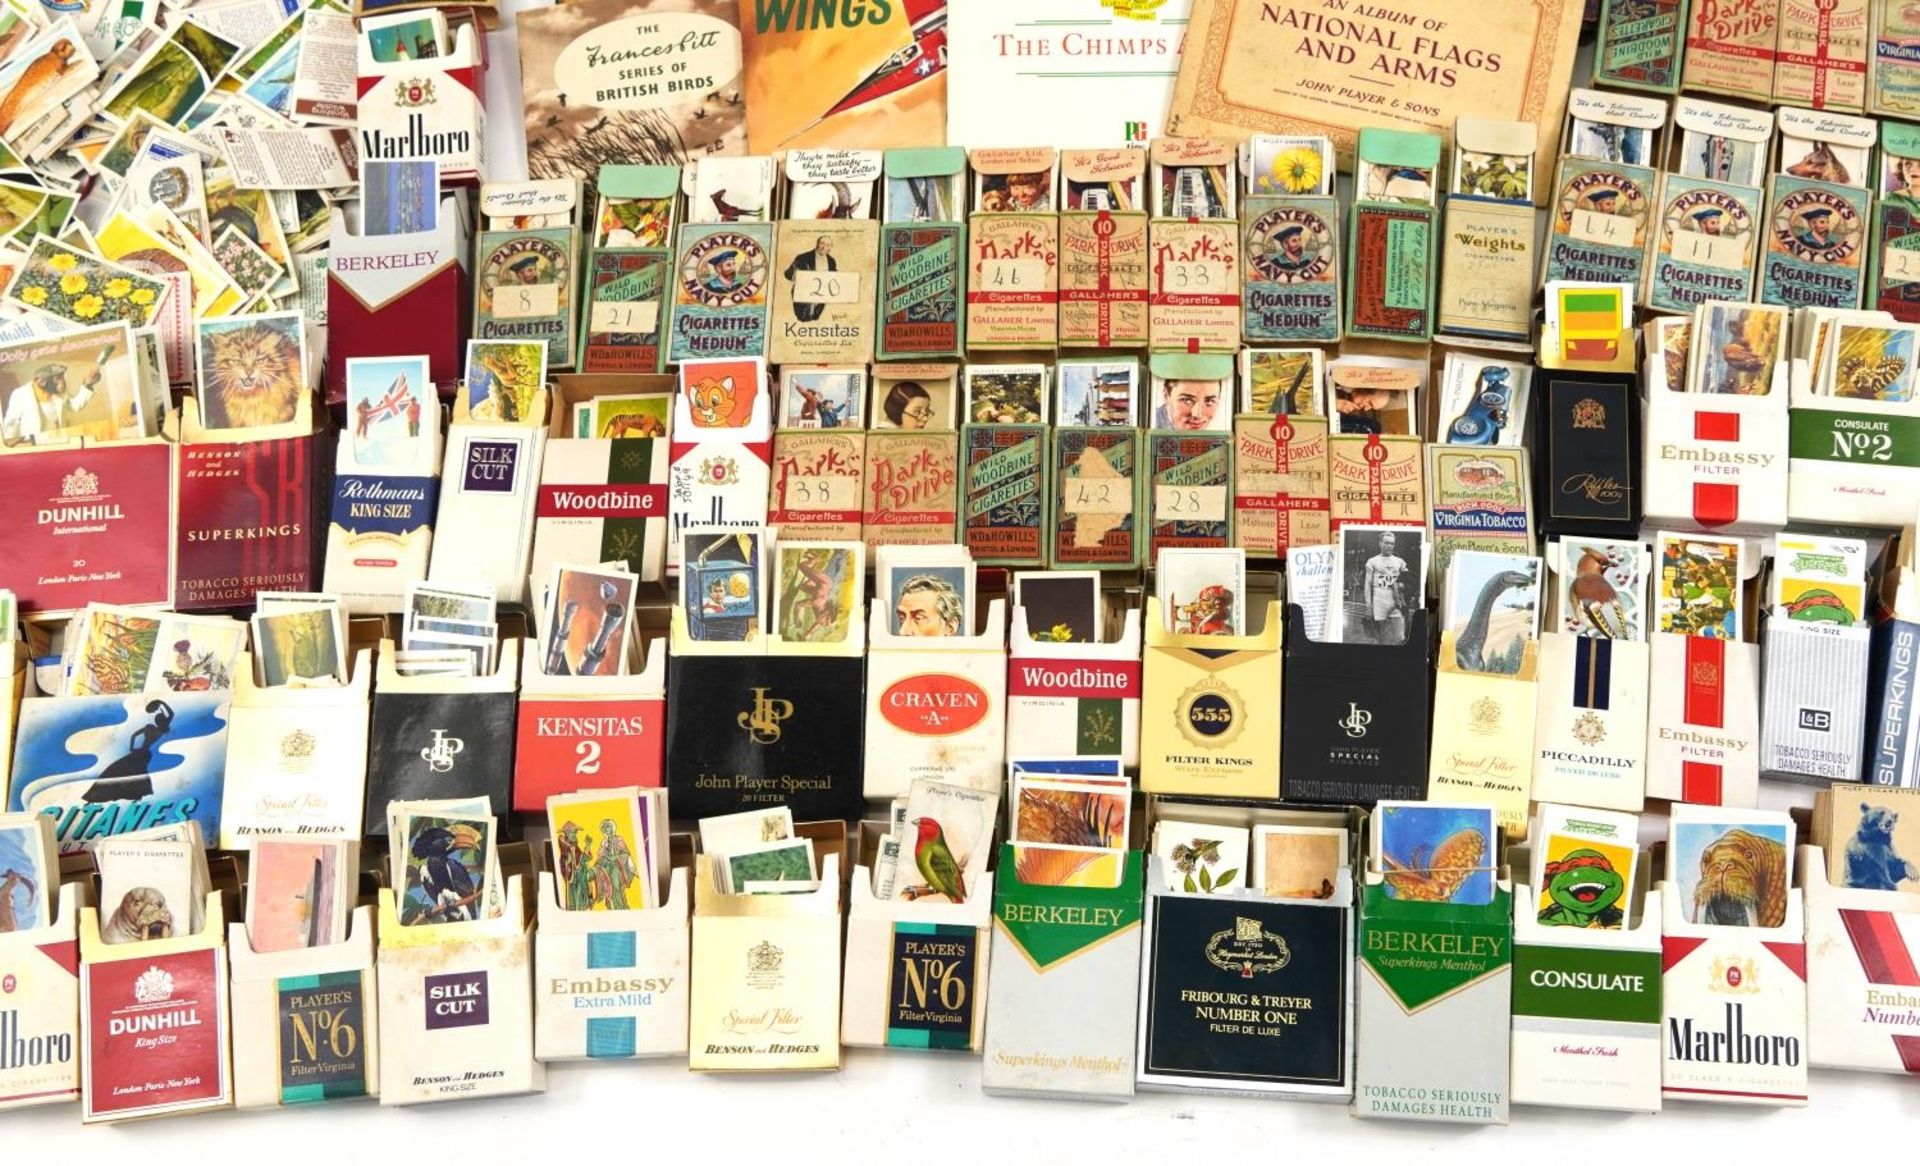 Extensive collection of cigarette and tea cards, some arranged in albums including Brooke Bond - Image 6 of 11